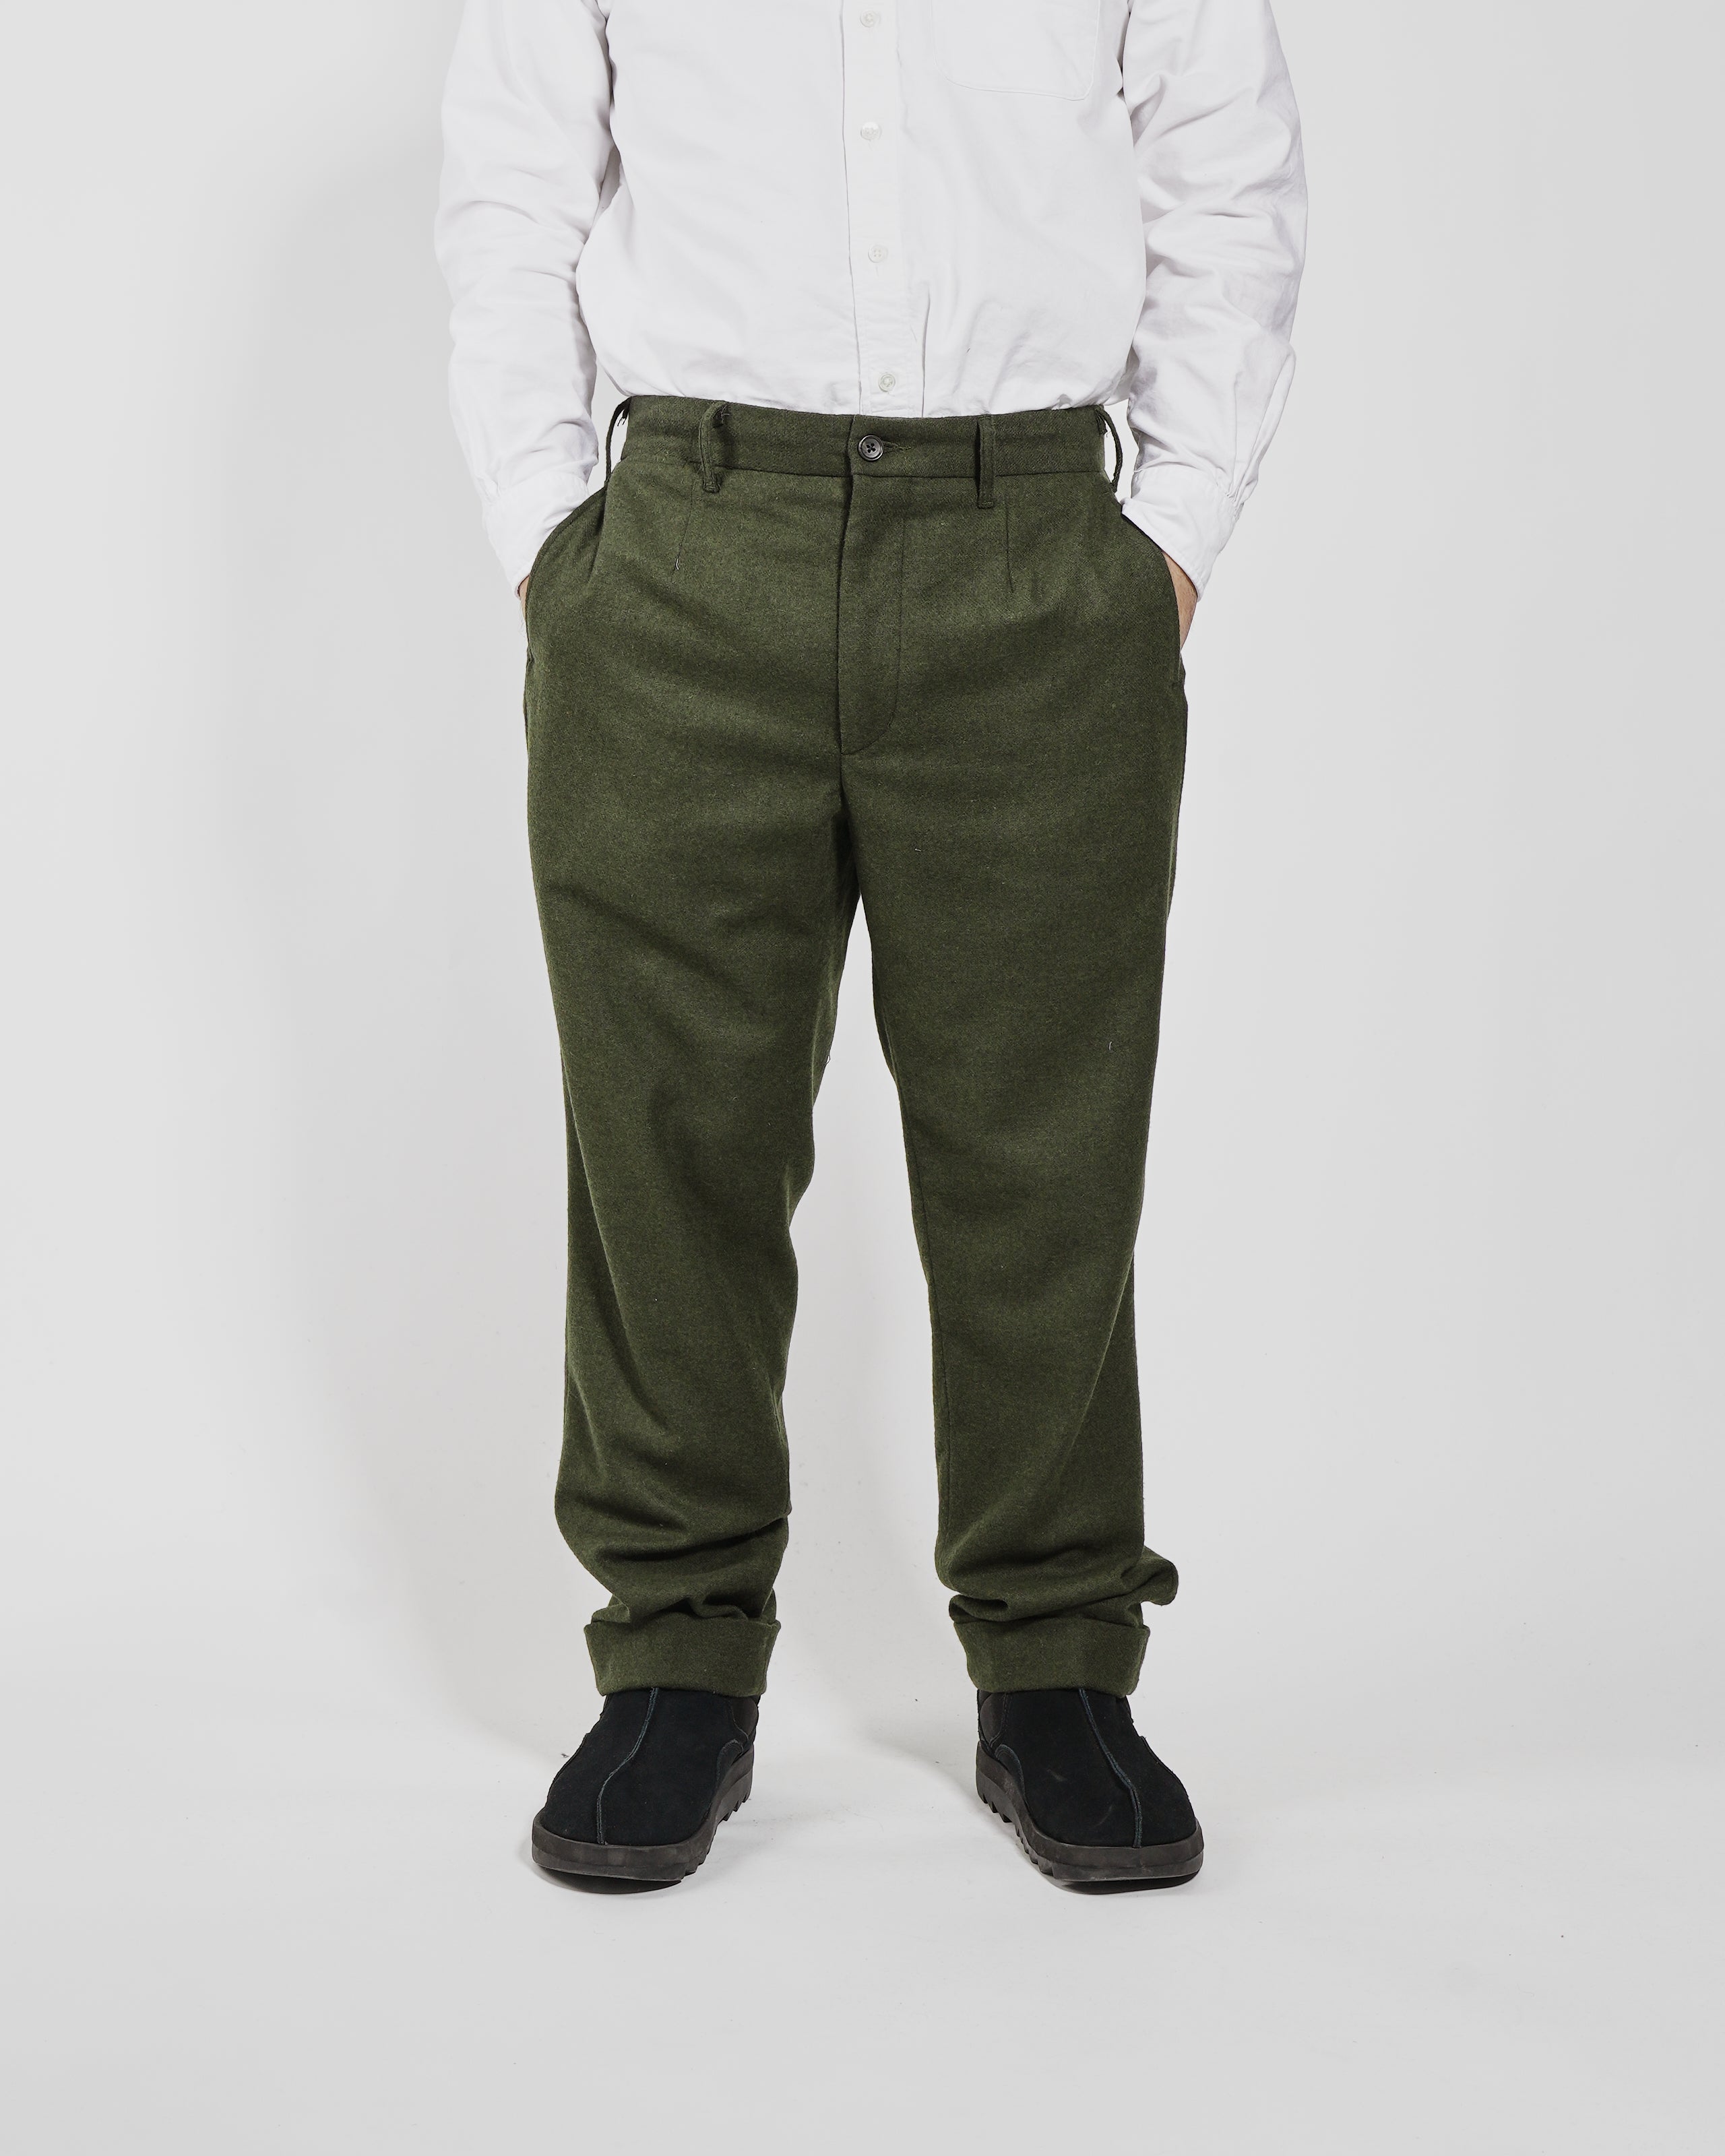 Andover Pant - Olive Solid Poly Wool Flannel